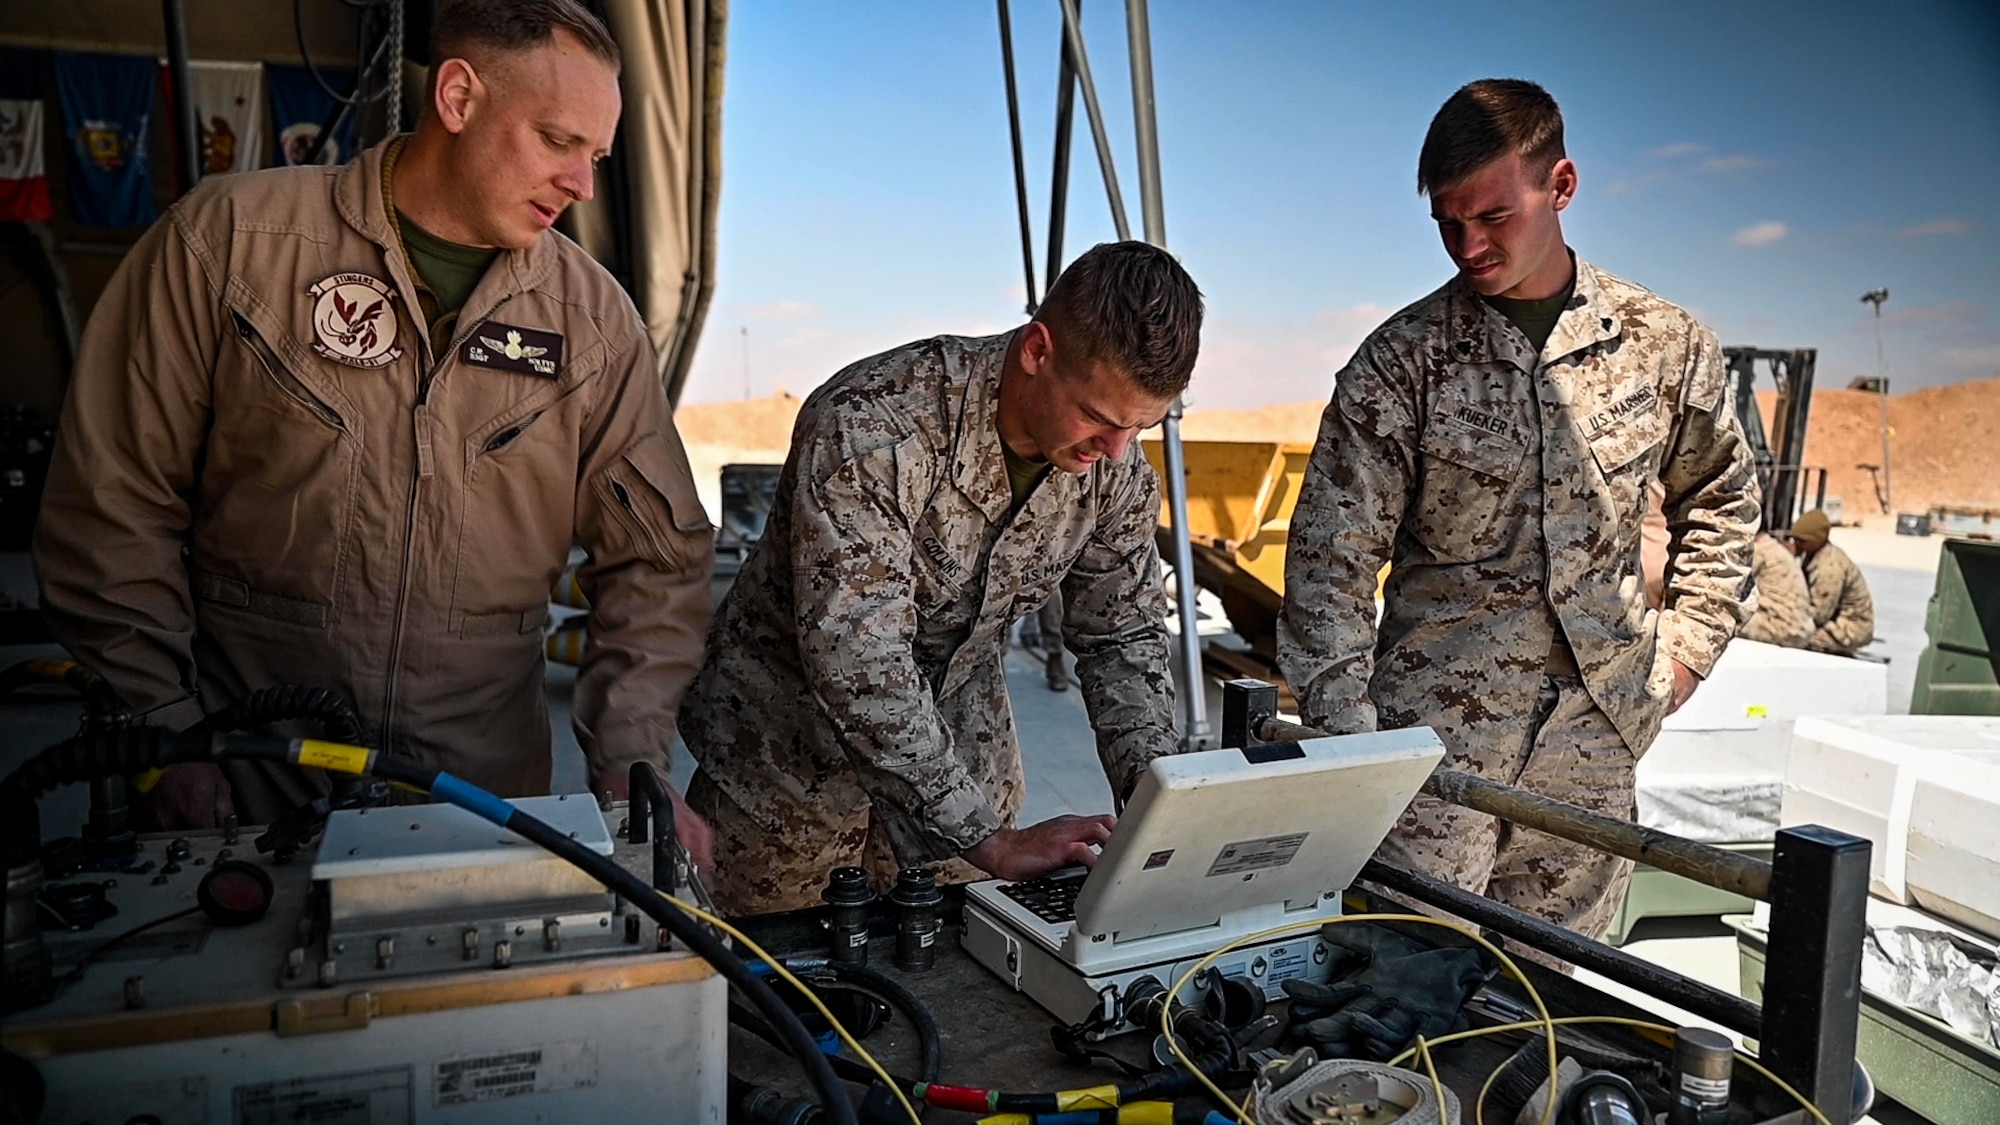 Marine Fighter Attack Squadron 115 aviation ordnance technicians load compatible software for a U. S. Air Force Guided Bomb Unit 38 to be employed on a U.S. Marine Corps F/A-18 Hornet proof of concept mission at an undisclosed location in Southwest Asia, March 14, 2022. VMFA-115 integrated with the 332d Air Expeditionary Wing to further interoperability between the two services by validating ordnance compatibilities between U.S. Air Force and U.S. Marine Corps assets during Operation Agile Spartan II. (U.S. Air Force Photo by Master Sgt. Christopher Parr)